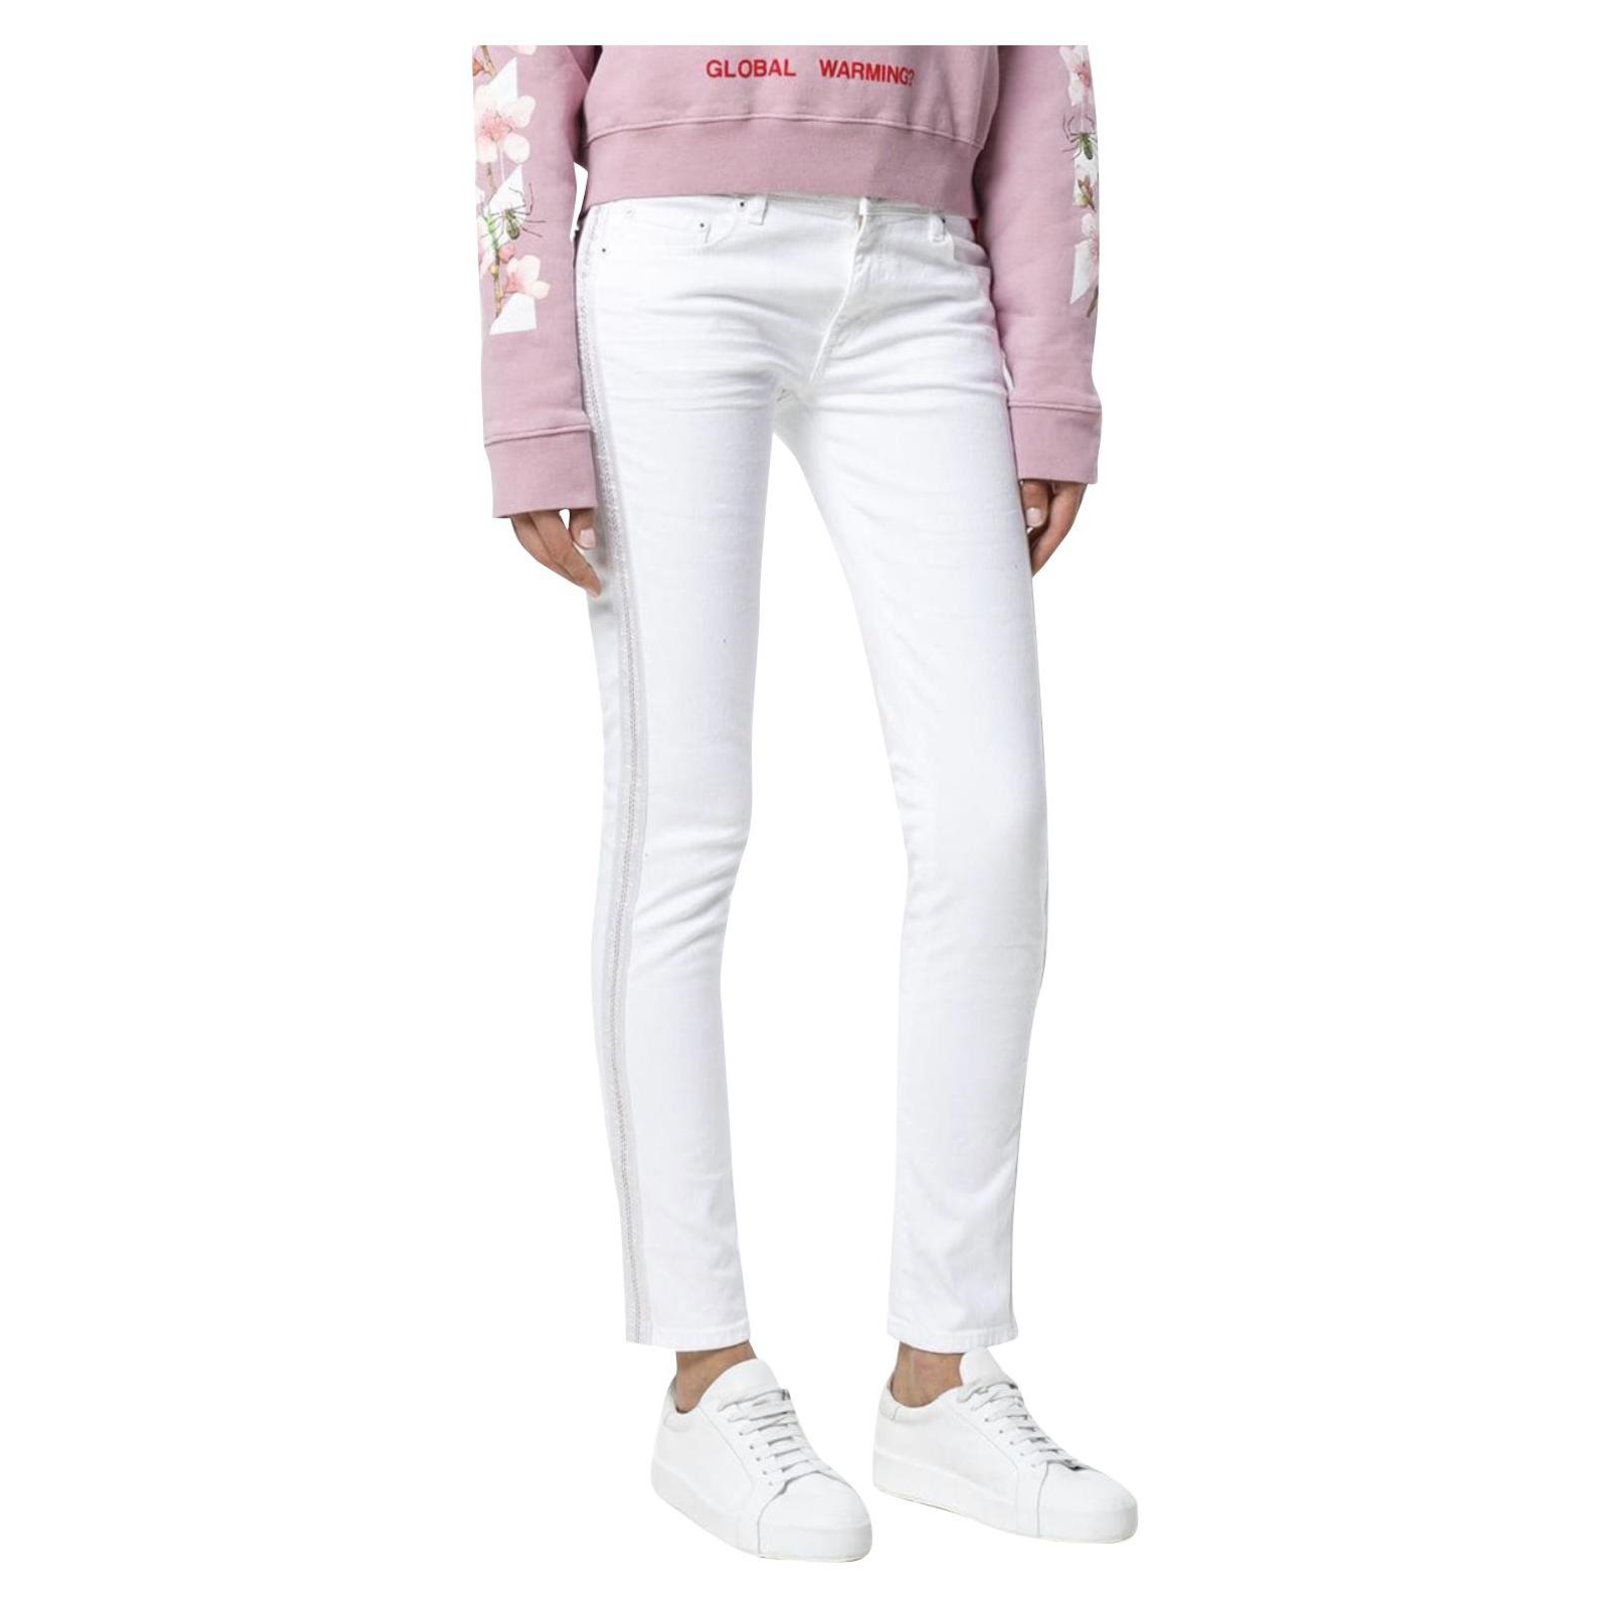 off white color jeans